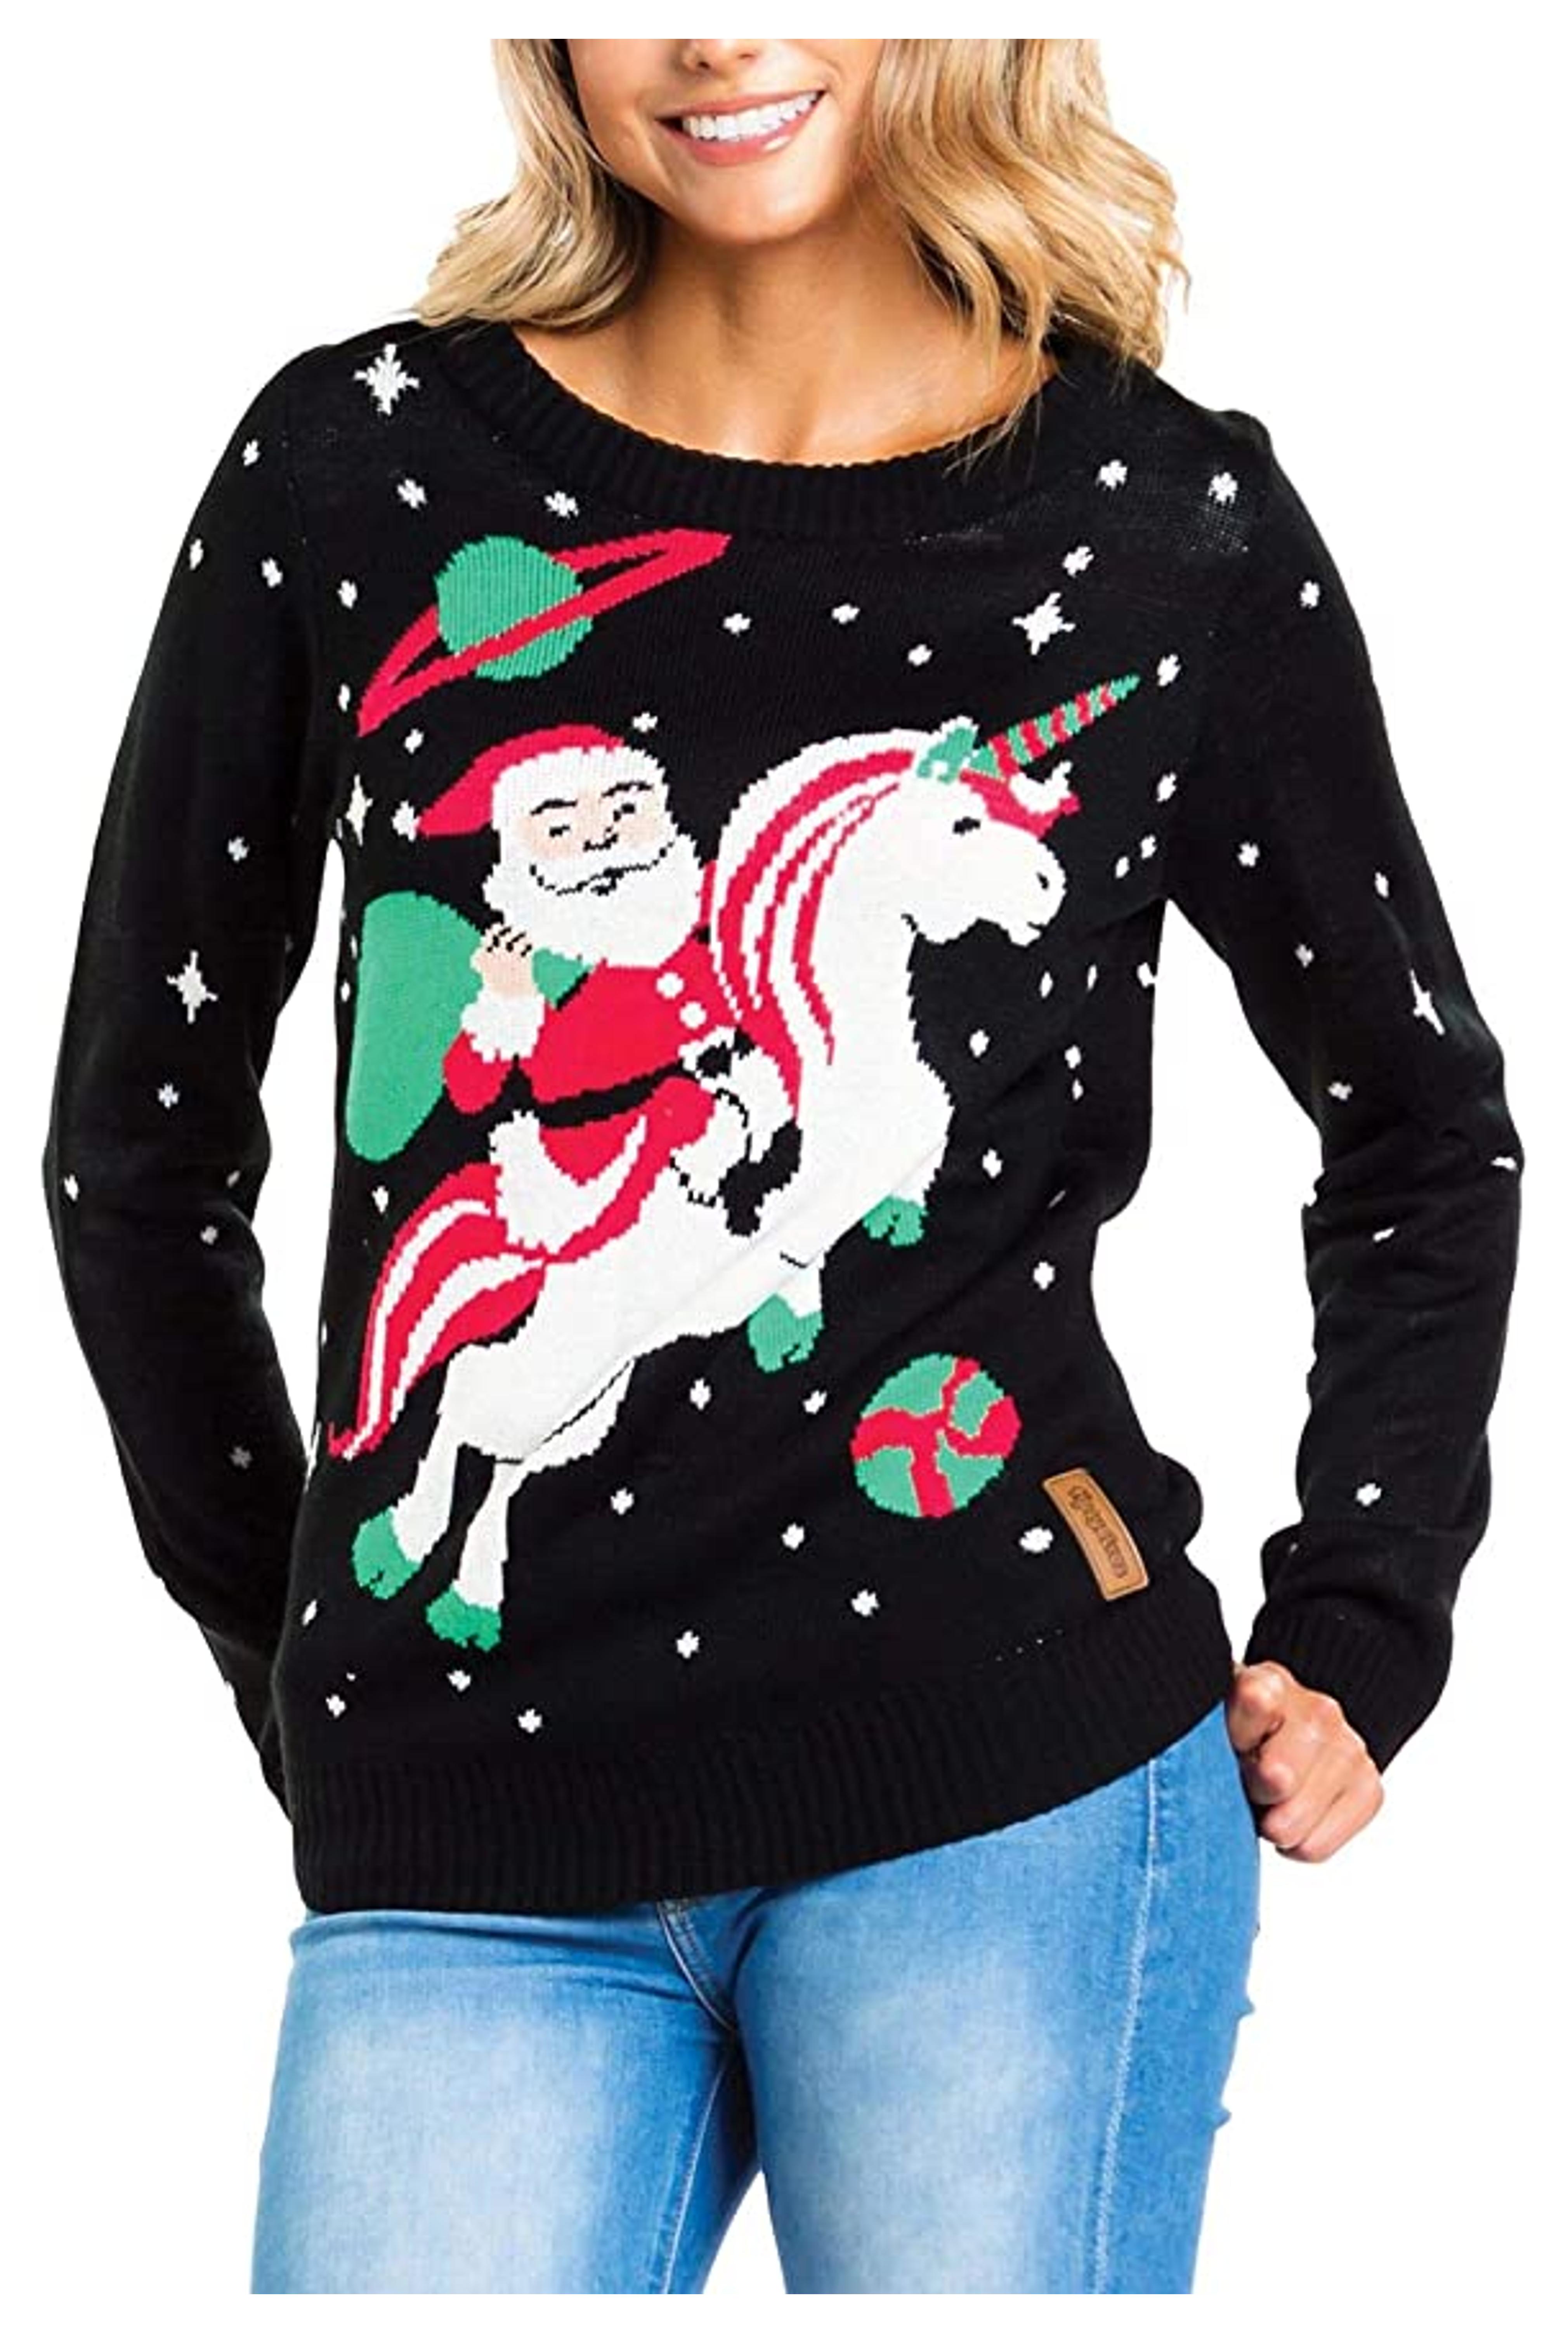 Amazon.com: Tipsy Elves Cute Animal and Santa Claus Ugly Christmas Sweater for Women Funny Adorable Sweaters for Holiday Parties : Clothing, Shoes & Jewelry